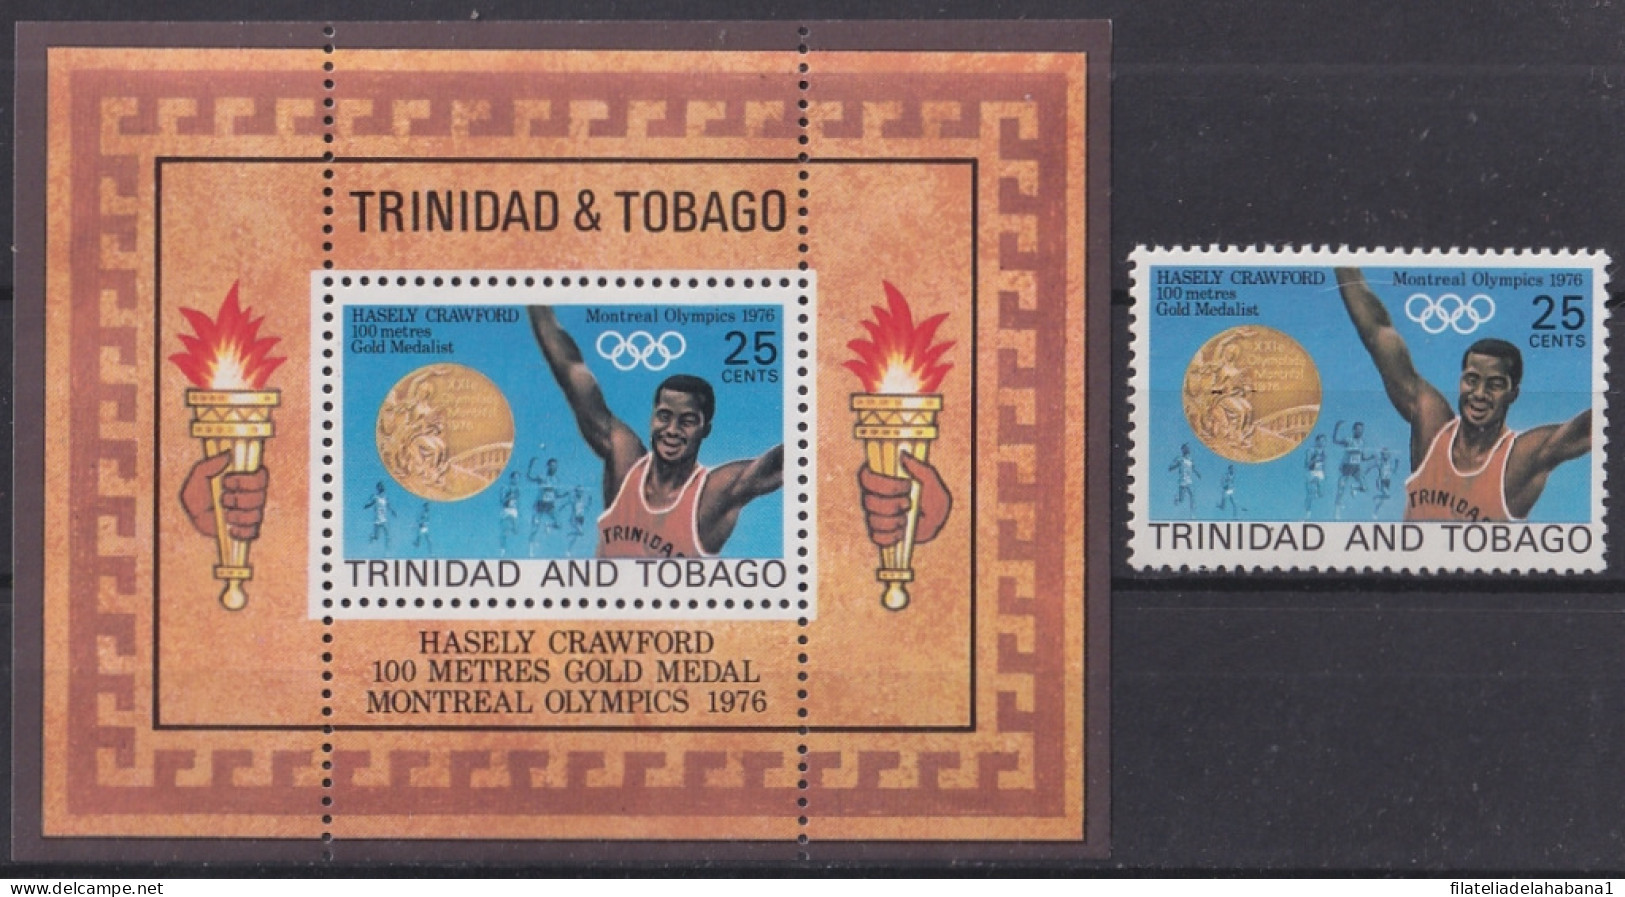 F-EX47644 TRINIDAD & TOBAGO MNH 1977 MONTREAL OLYMPIC GAMES ATHLETISM WINNER HASELY CRAWFORD.  - Verano 1976: Montréal